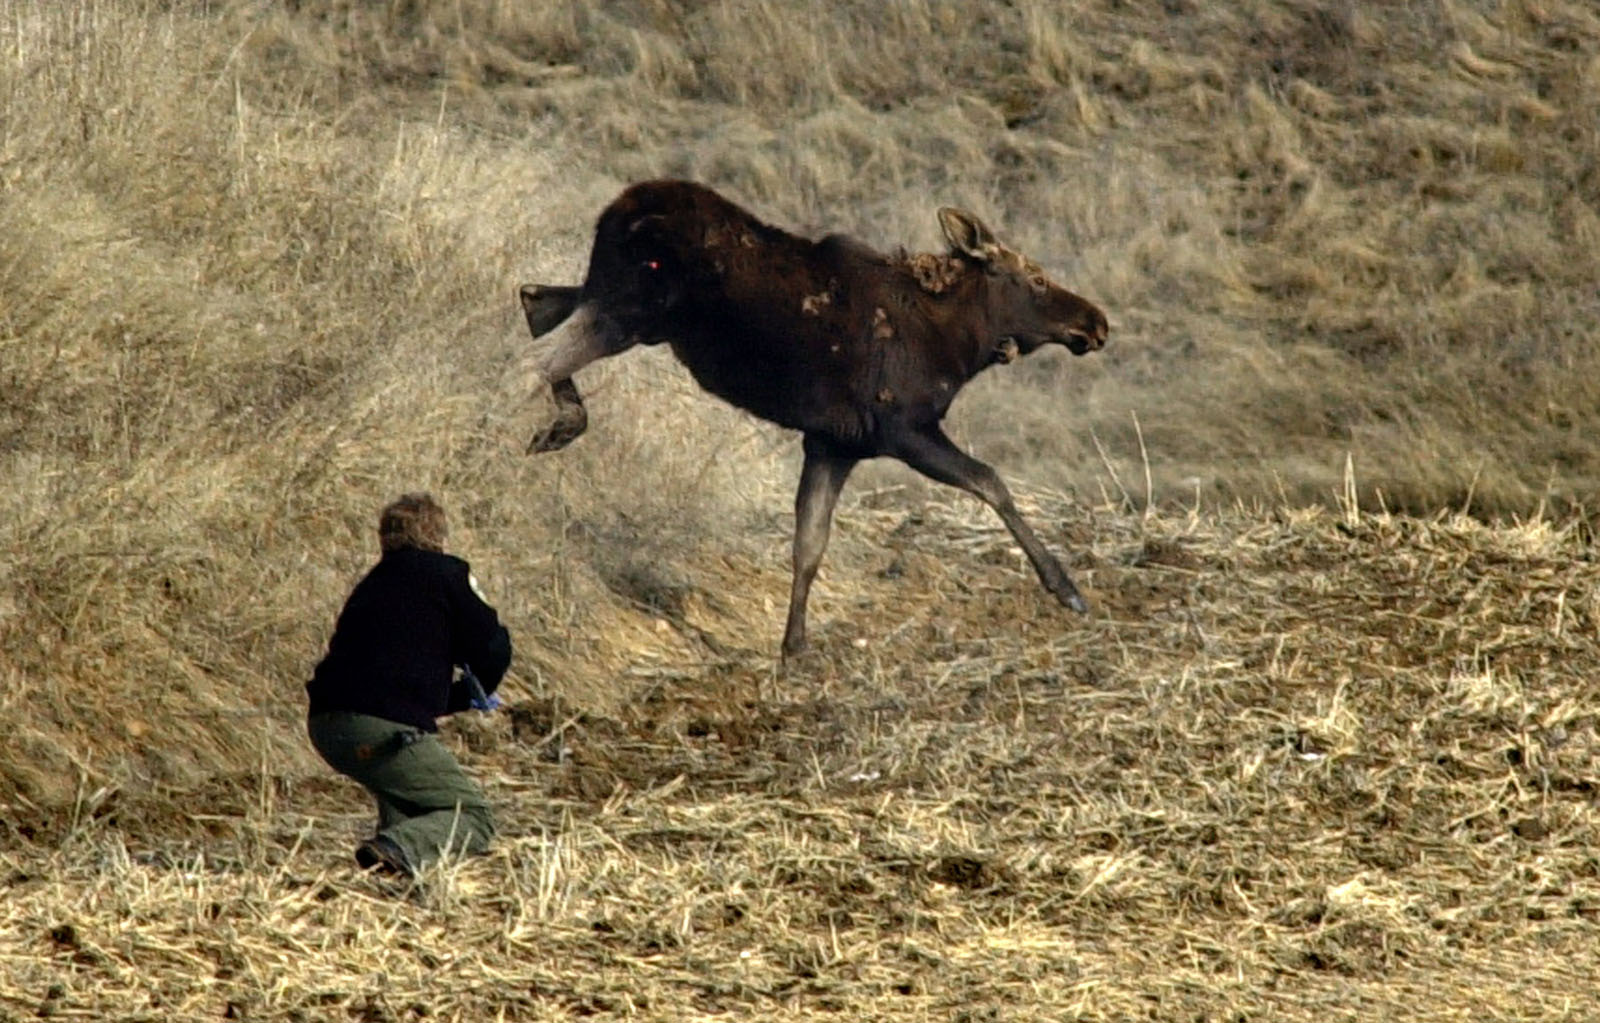 Biologist Woody Myers tranquilizes a moose near the community of Dusty in Whitman County.